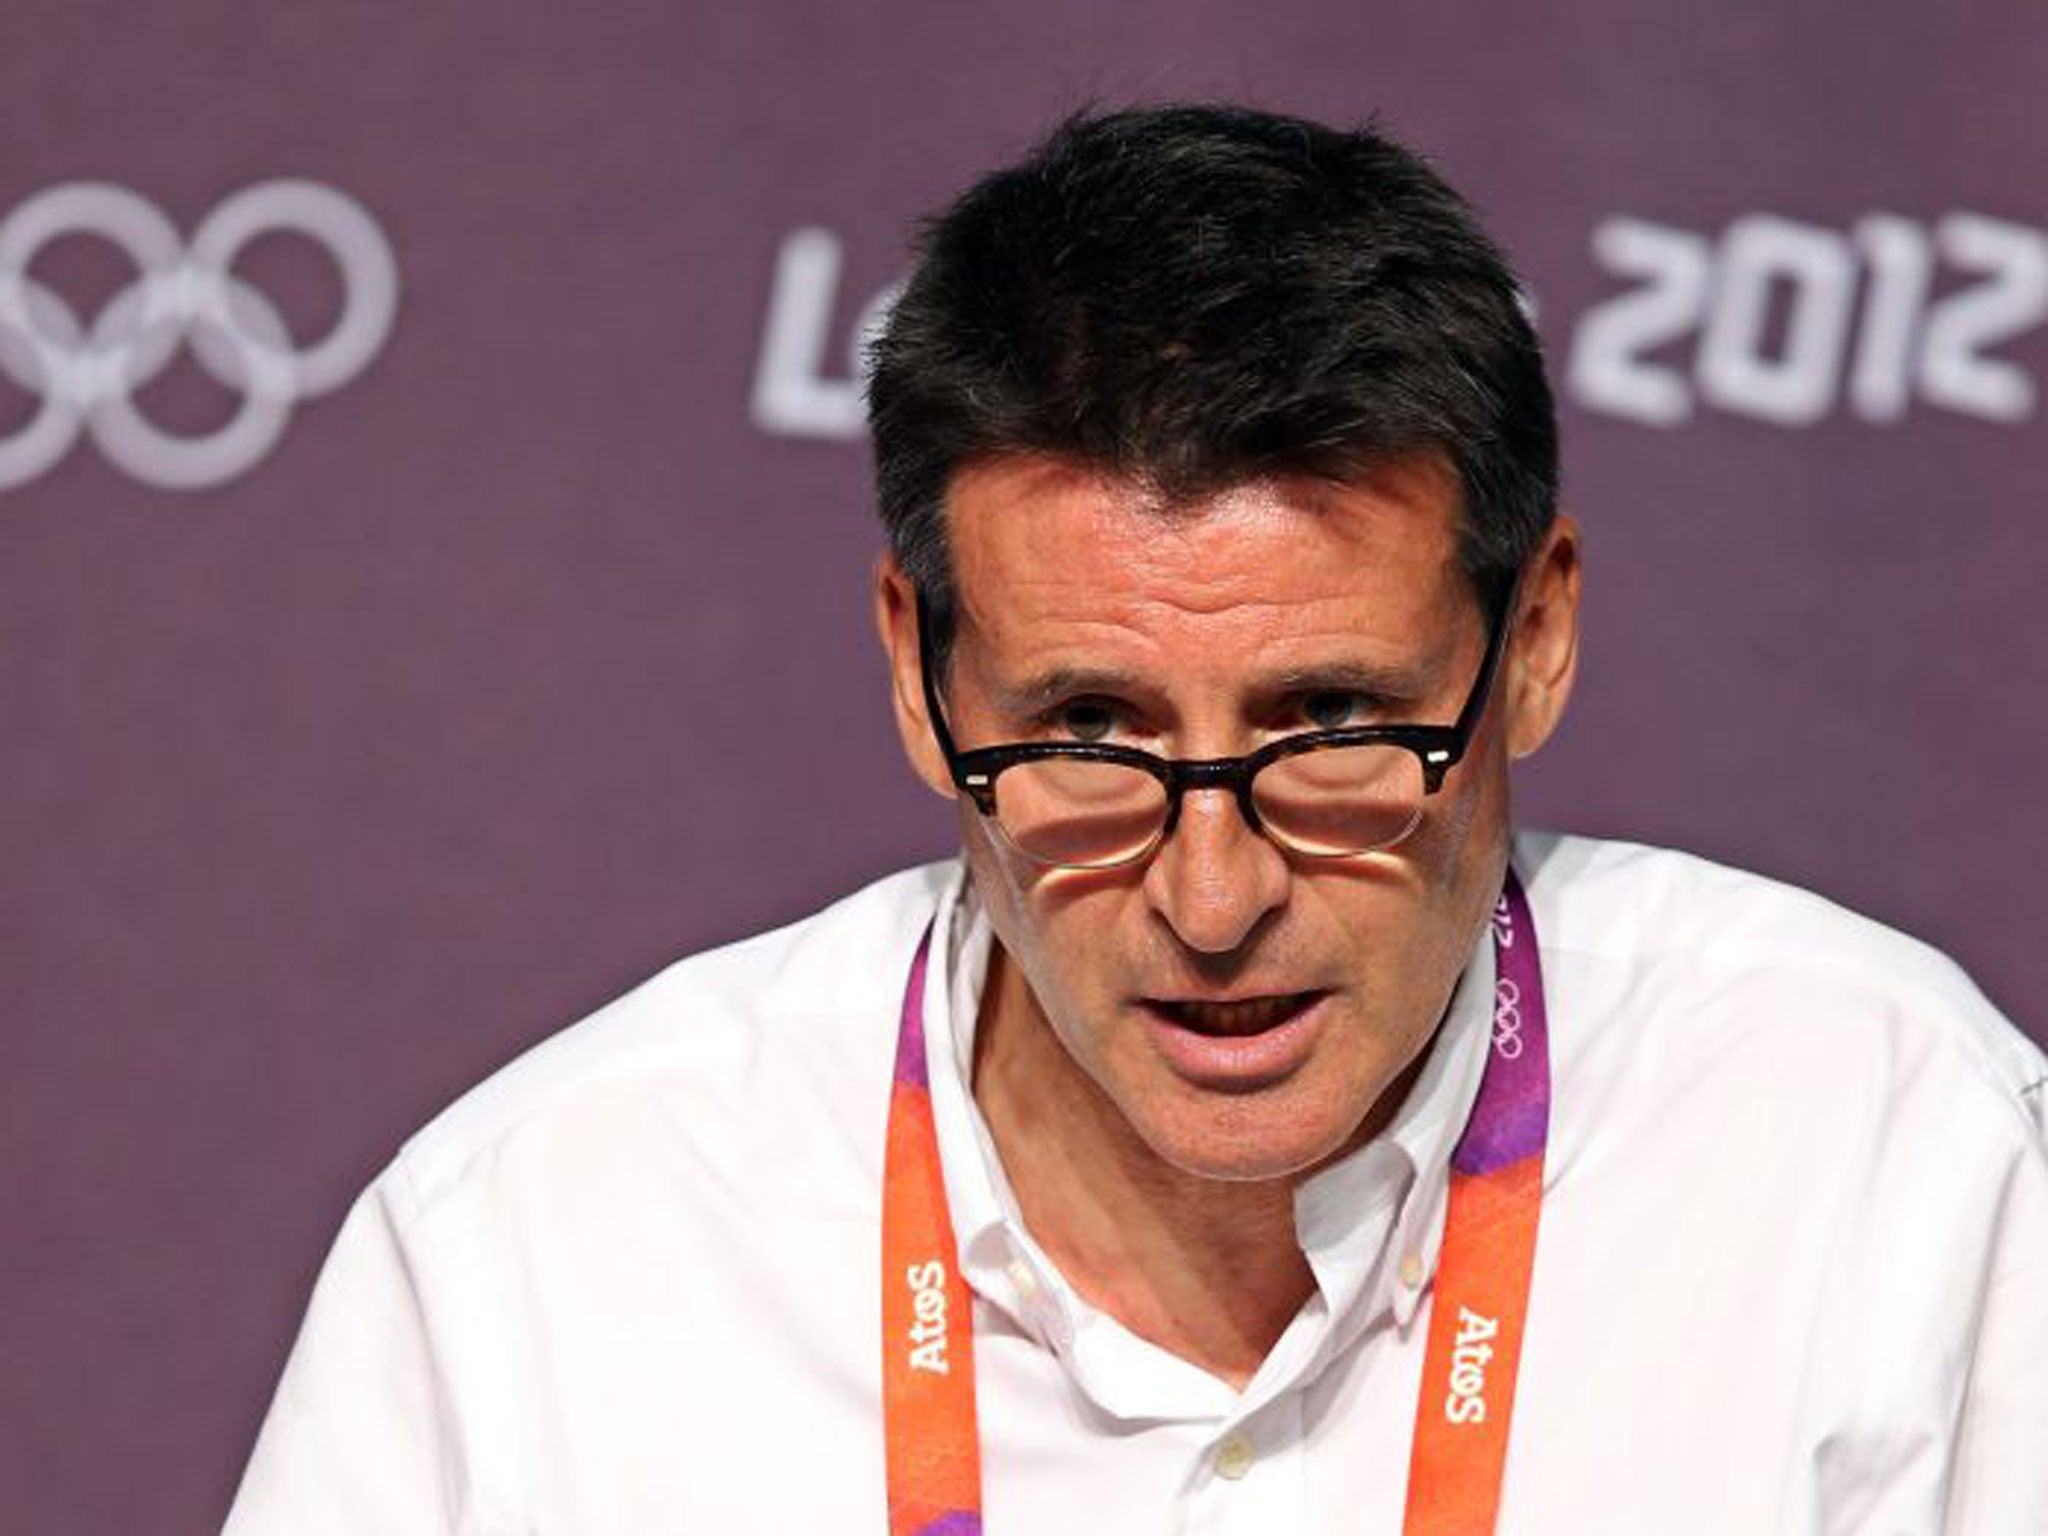 Lord Coe urged the public to secure items from the Games